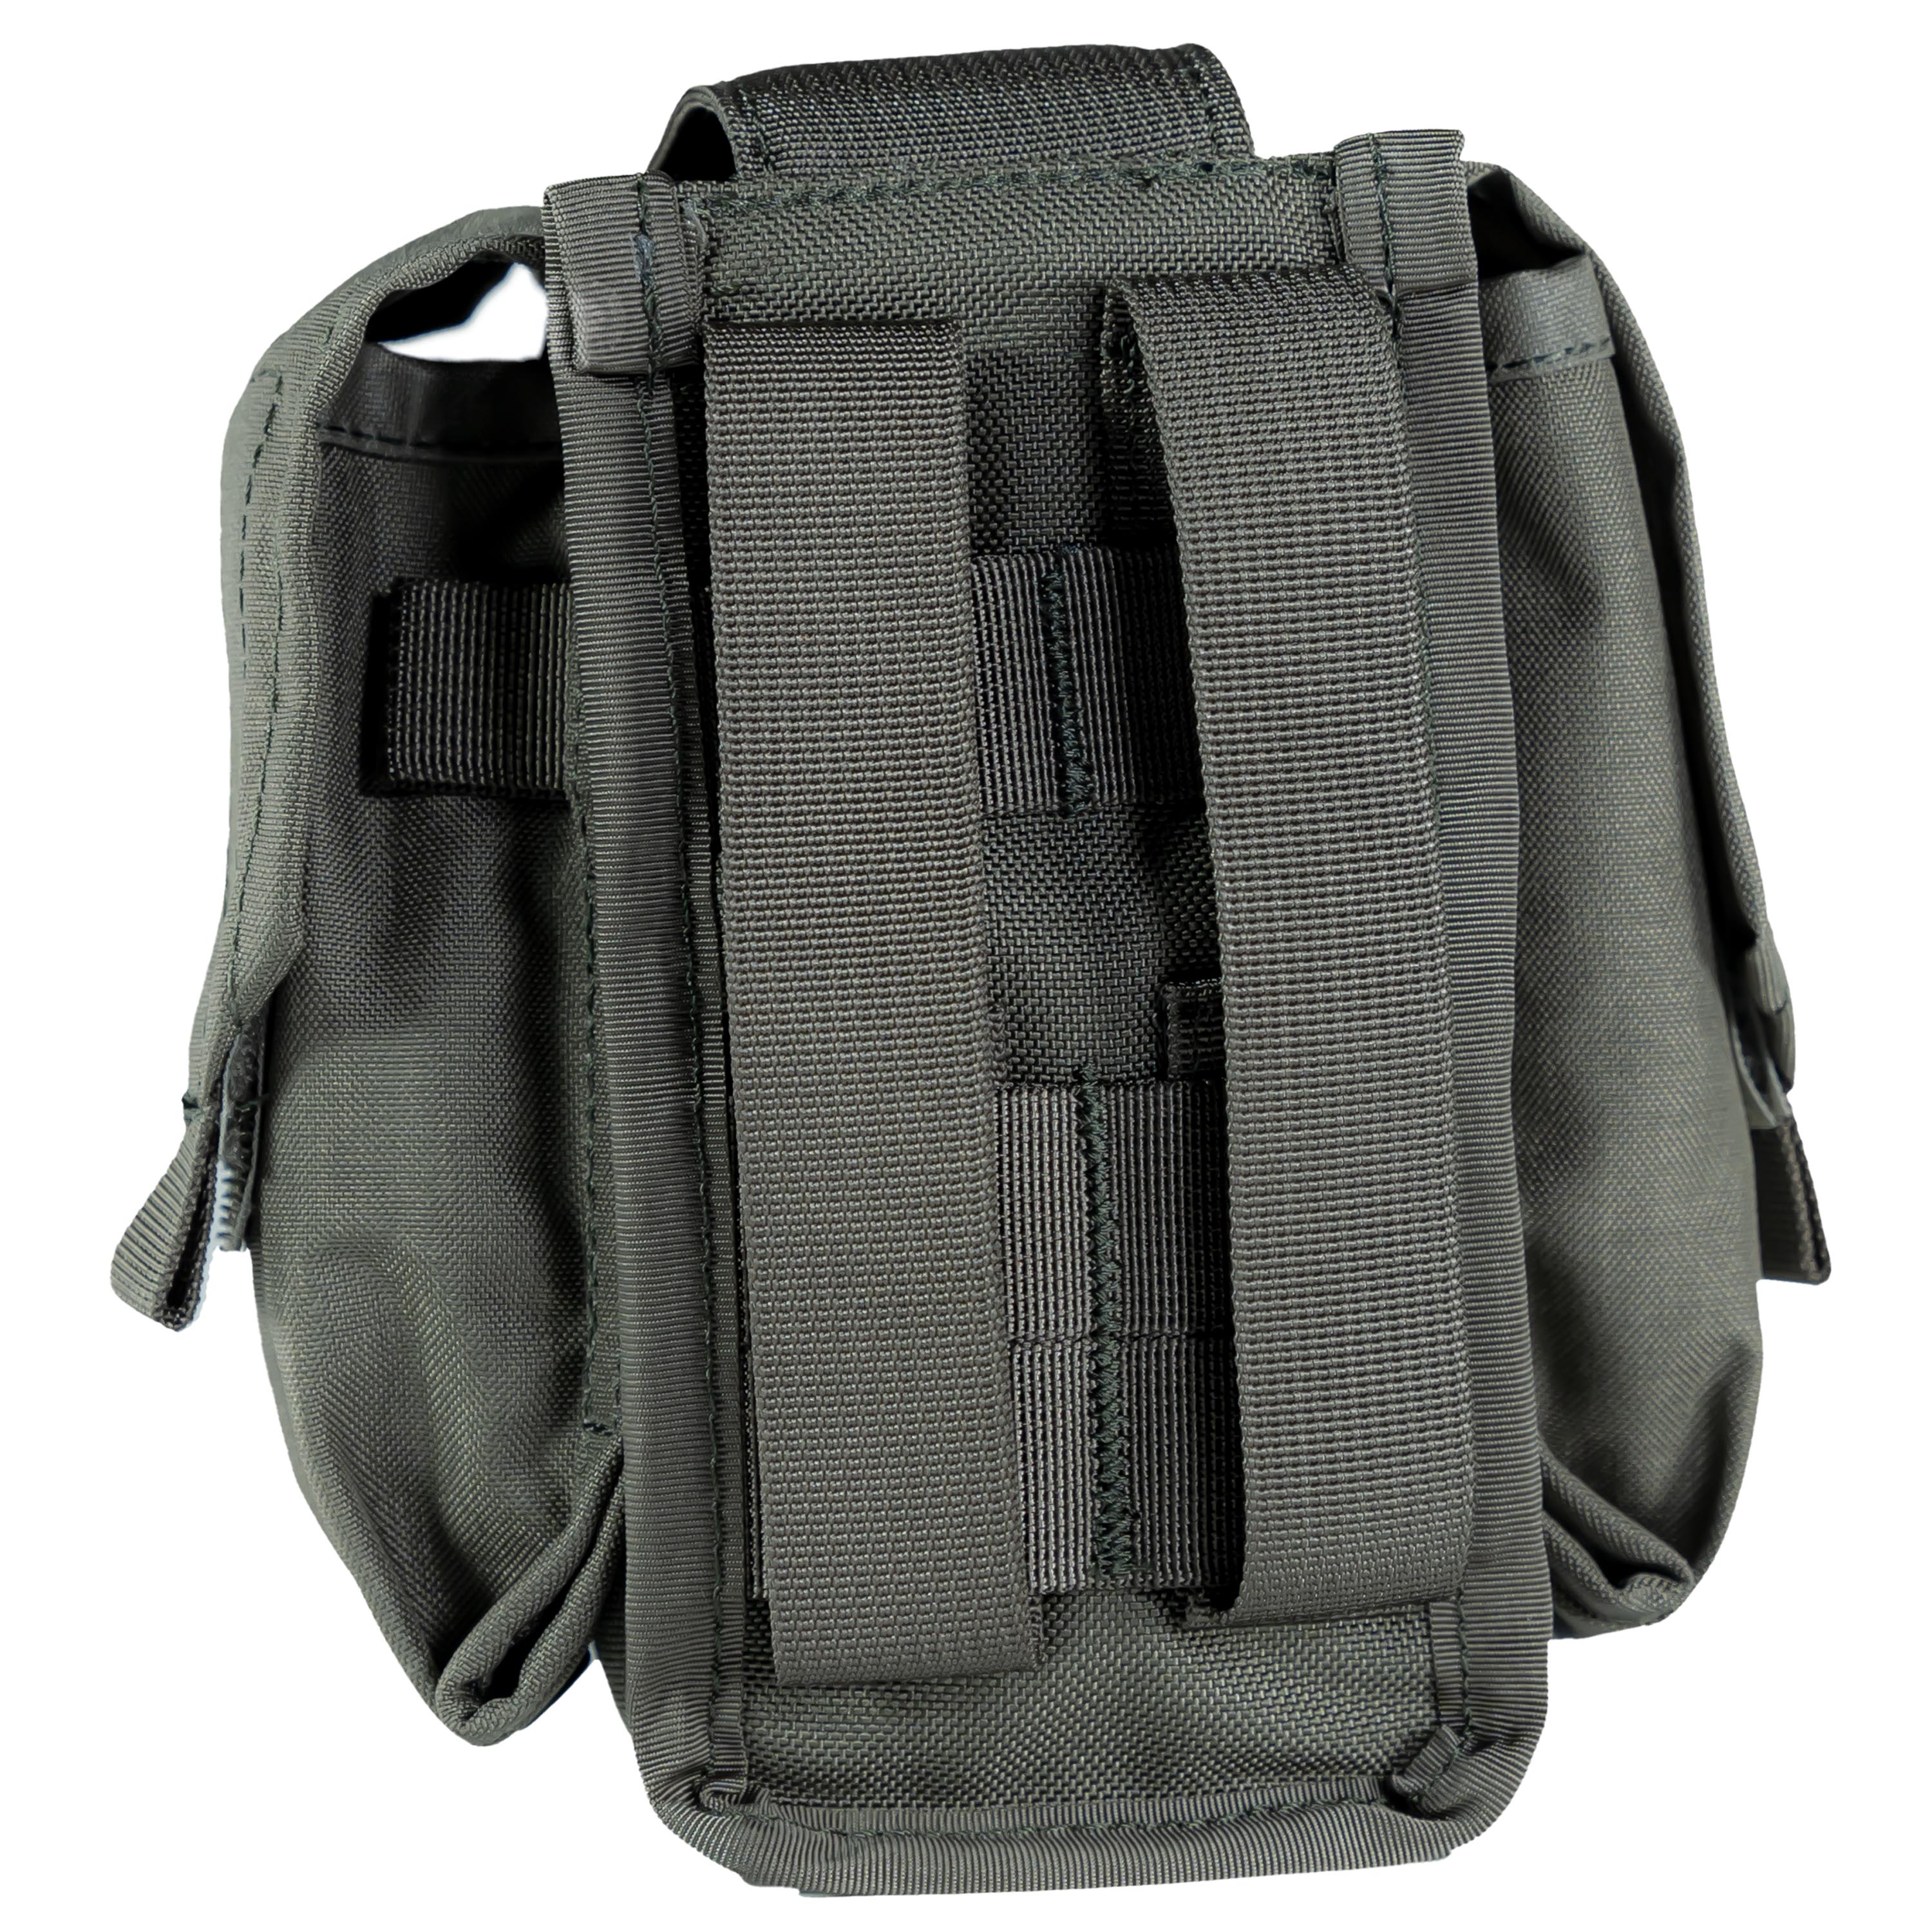 M4 Double Magazine MOLLE Pouch with pockets